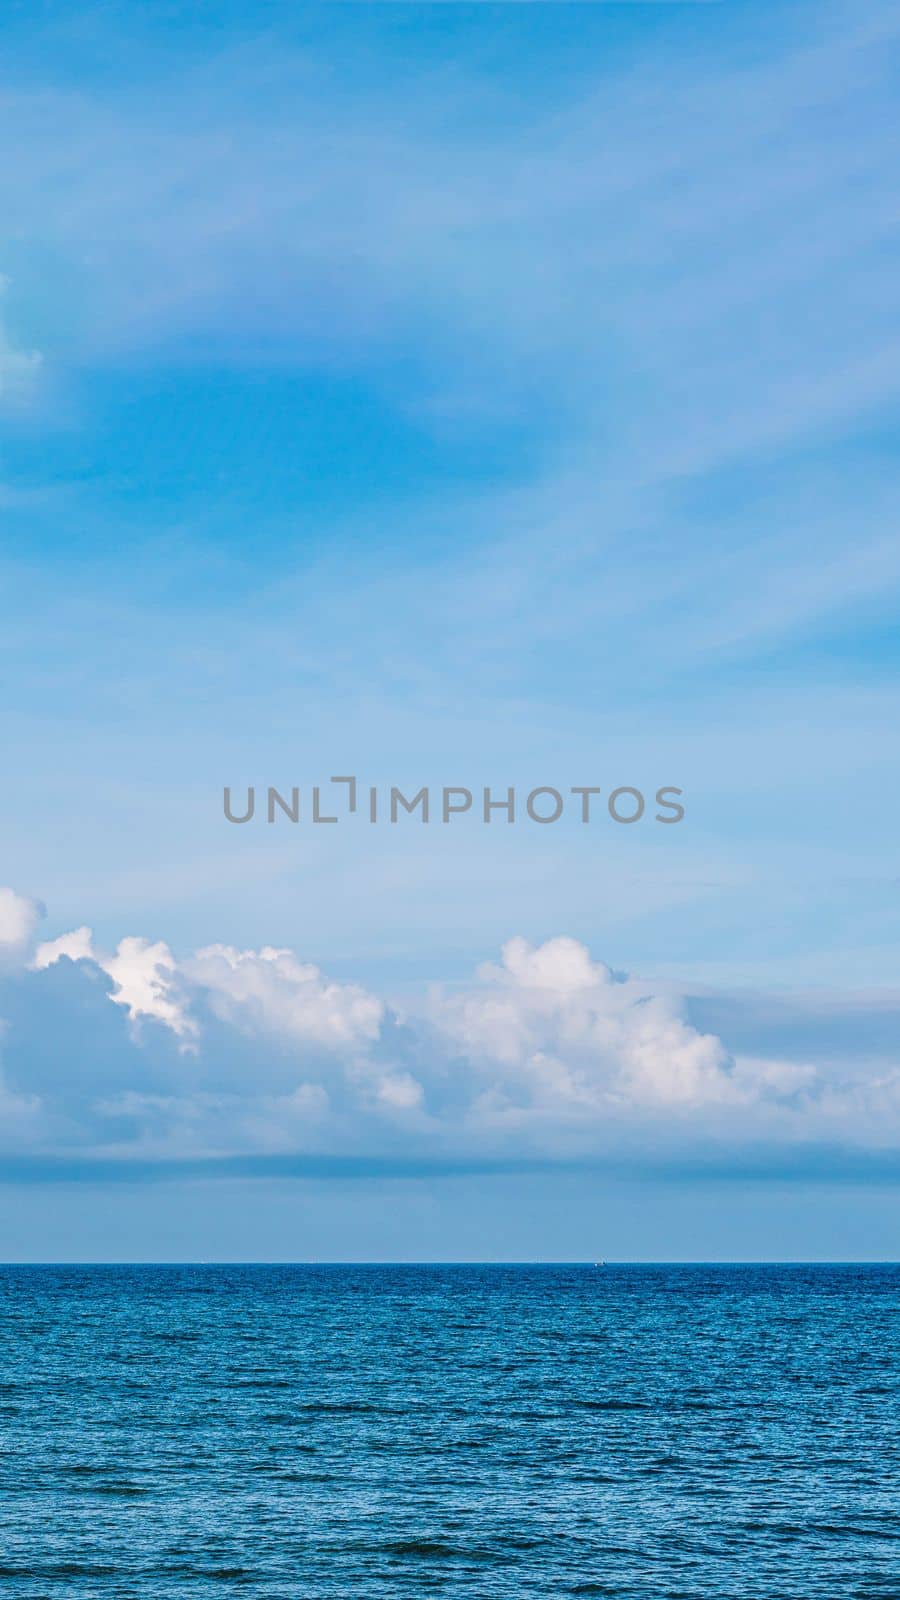 BANNER, VERTICAL STORY Atmosphere panorama white cloud clear blue sky horizon line calm empty sea. Concept paradise life. Design relax wallpaper background. More tone format in stock.